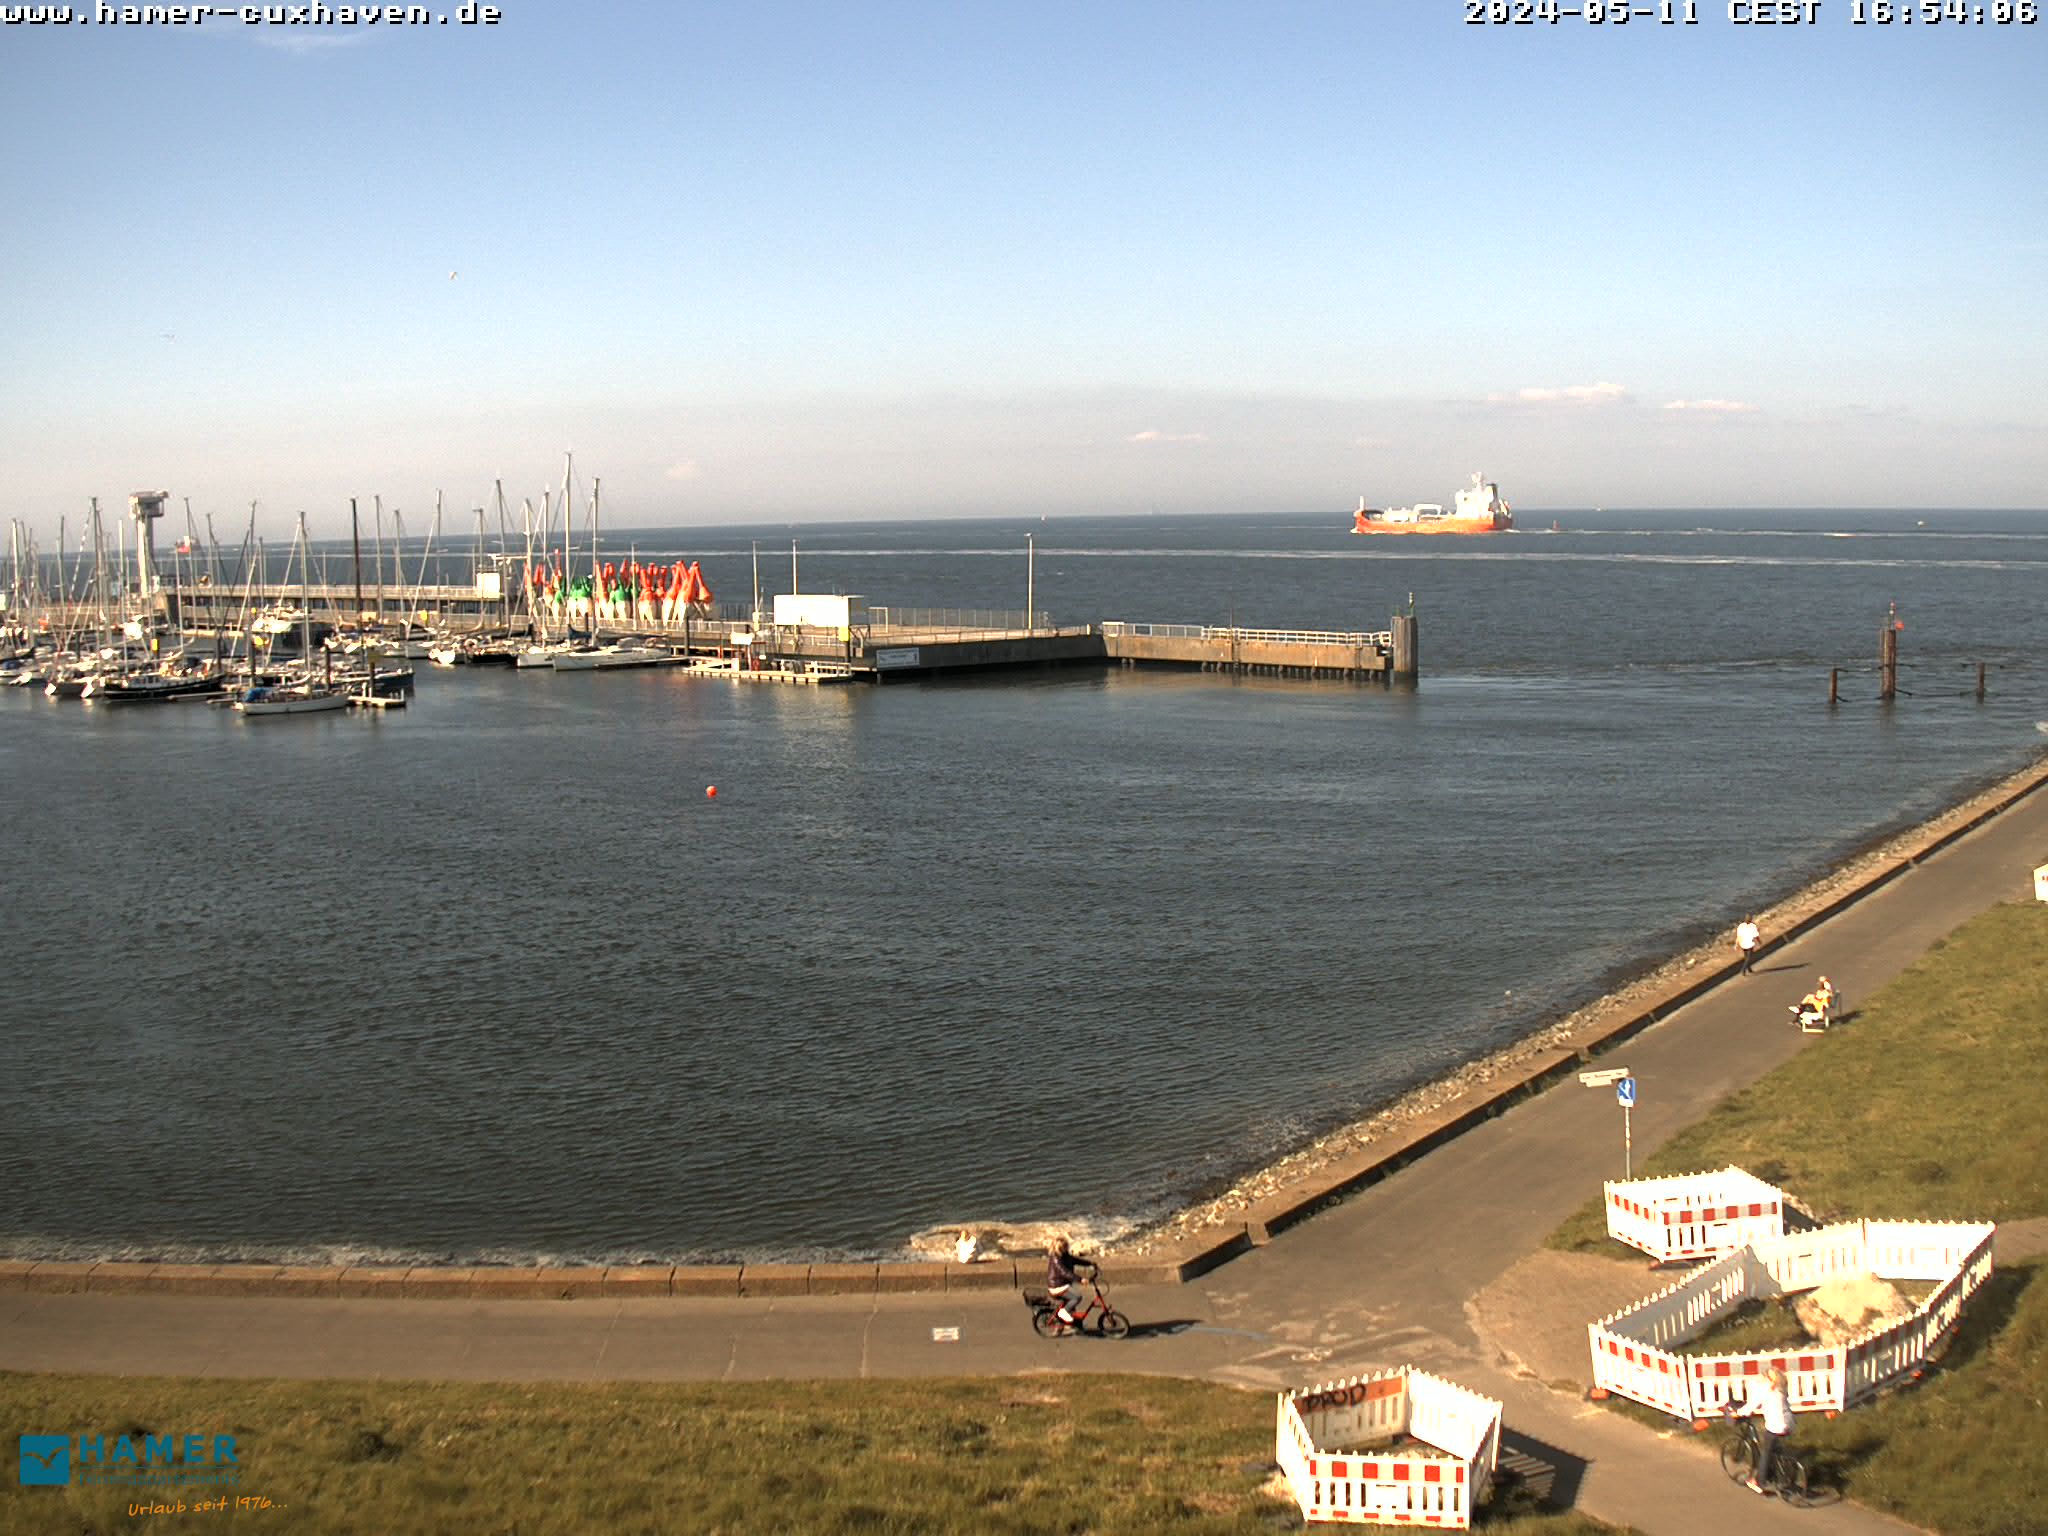 Cuxhaven Ons. 16:55